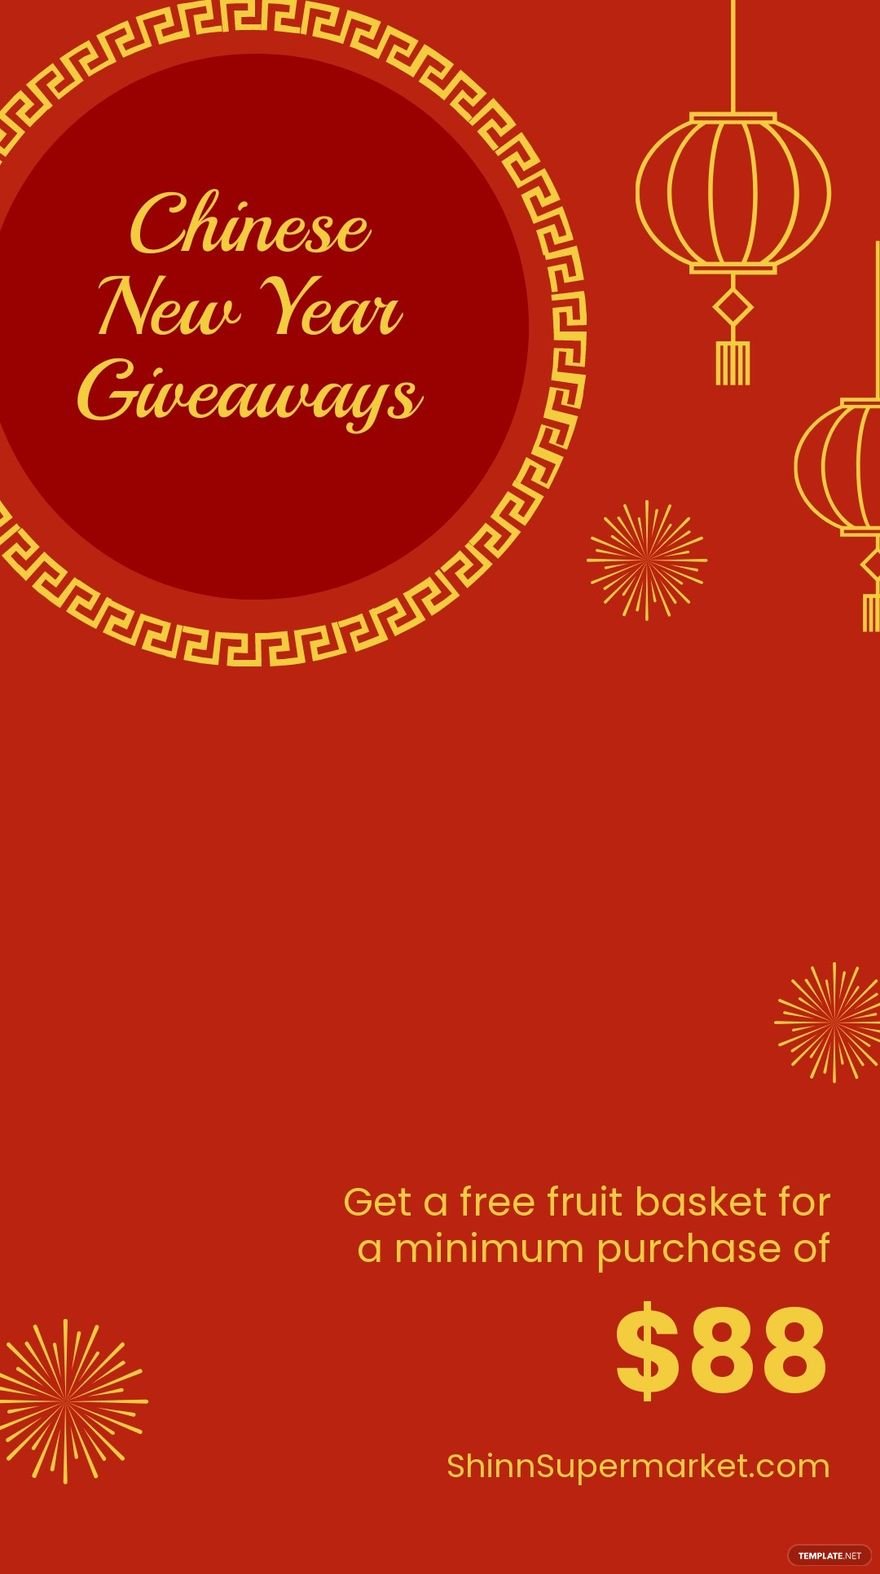 Chinese New Year Giveaway Snapchat Geofilter